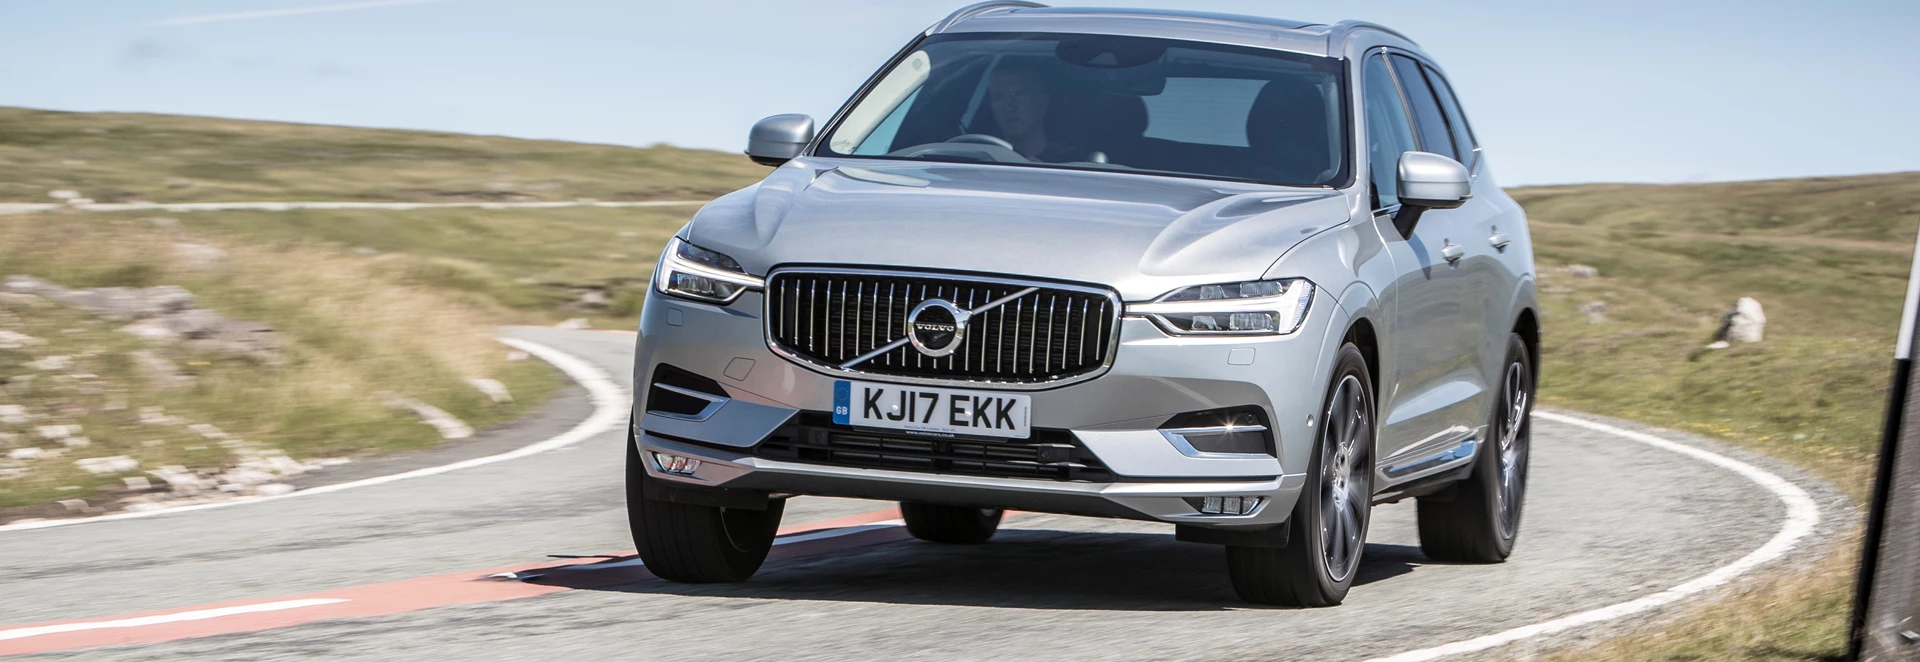 Volvo XC60 D4 AWD Momentum Pro SUV Review 